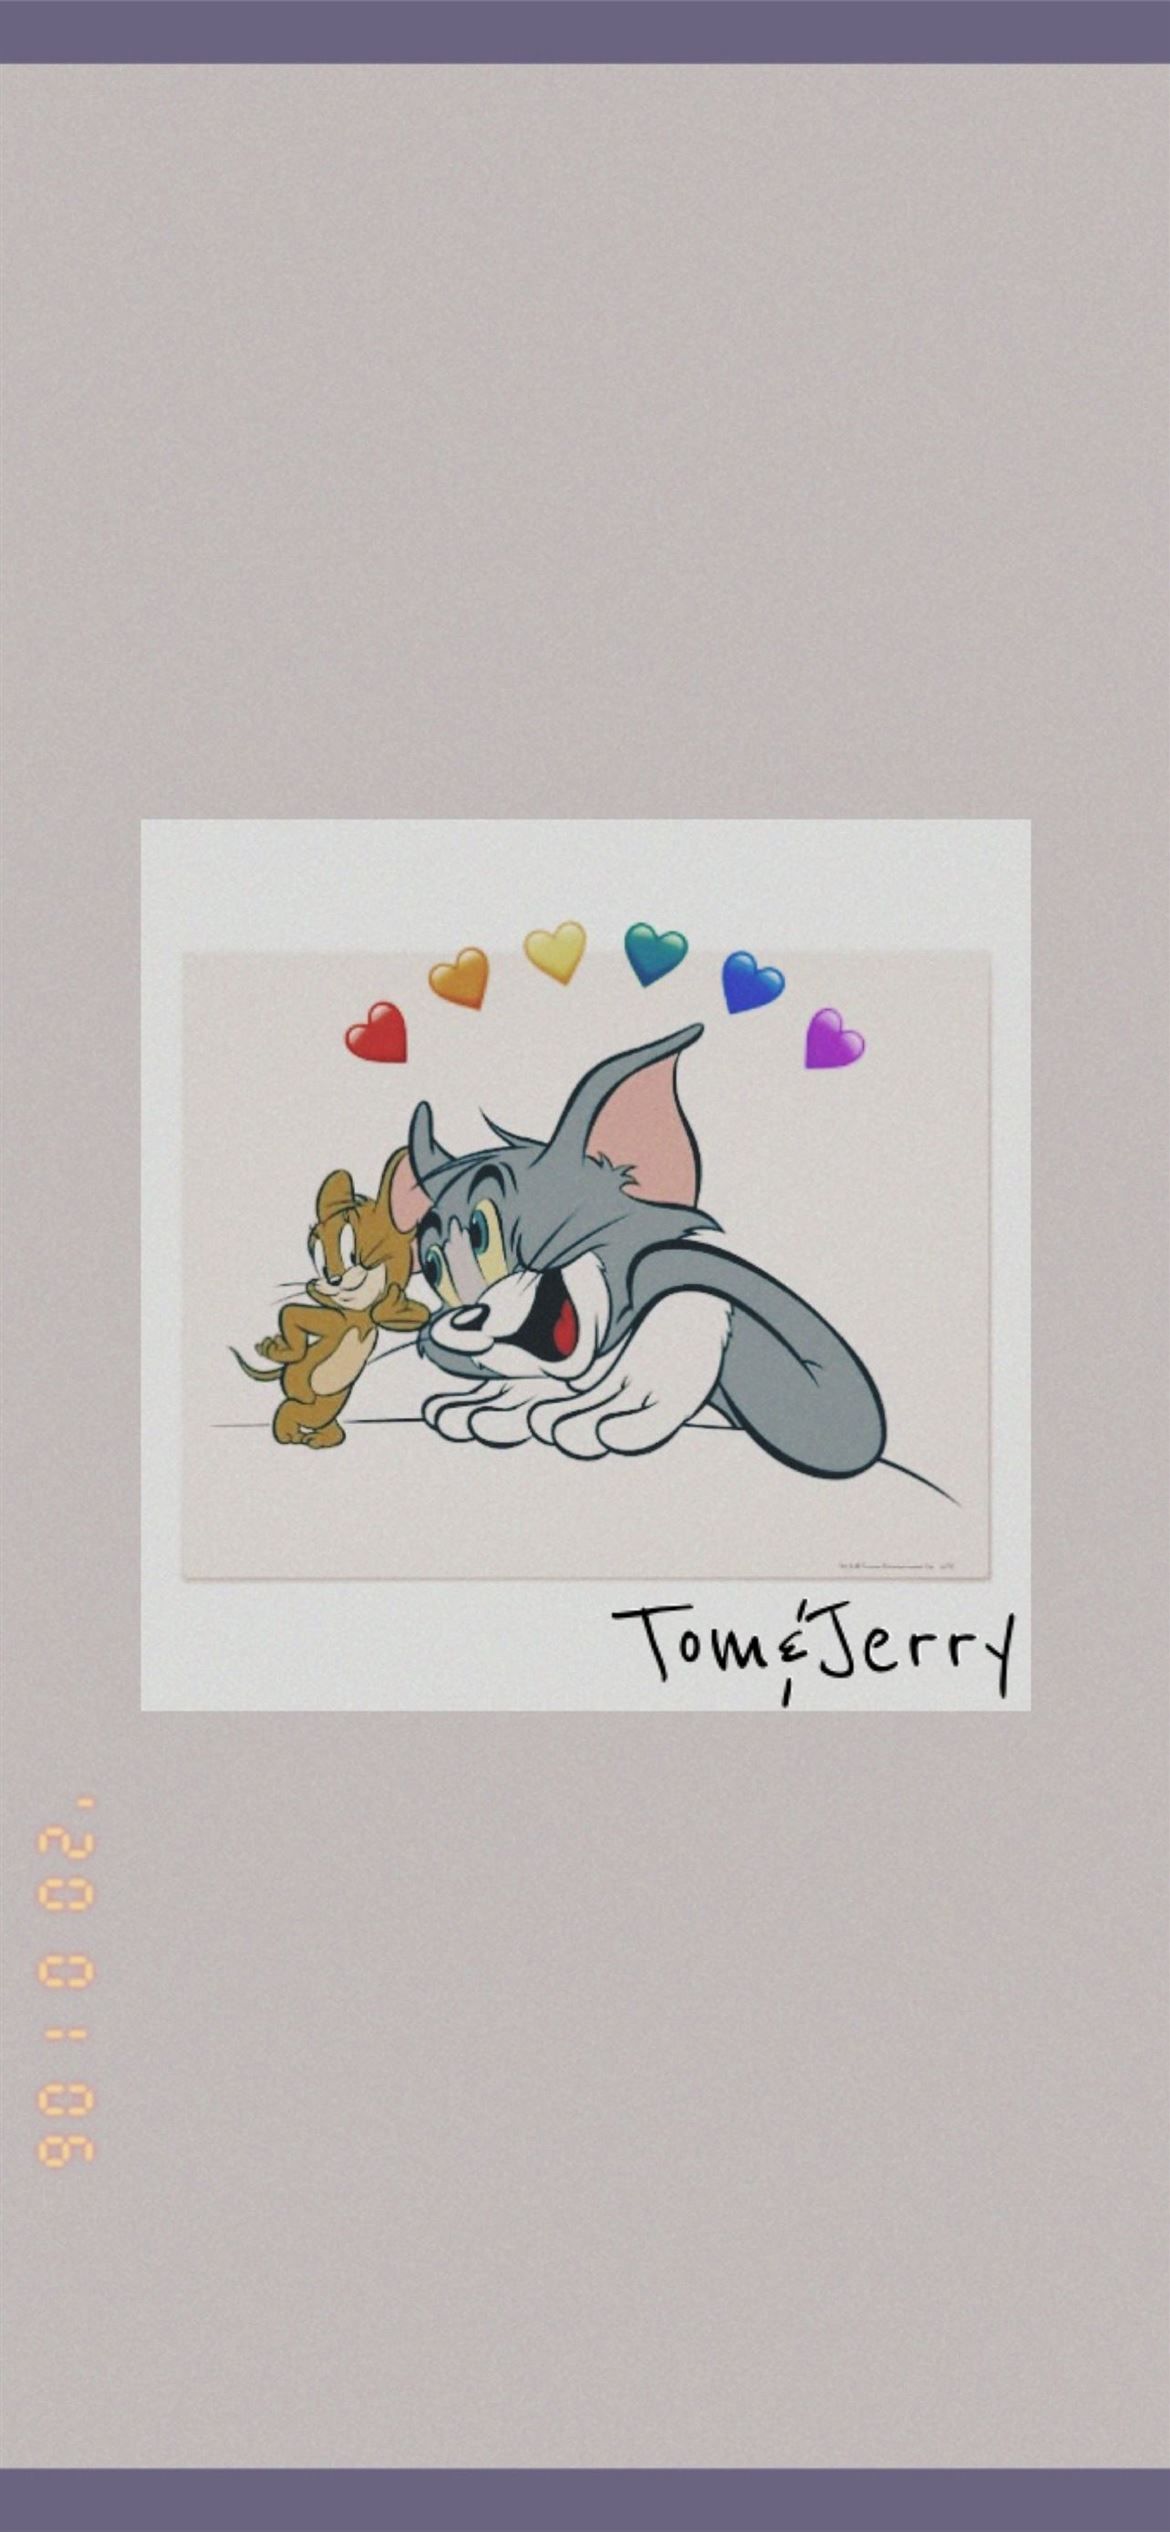 Tom Jerry in 2021 iPhone Wallpaper Free Download